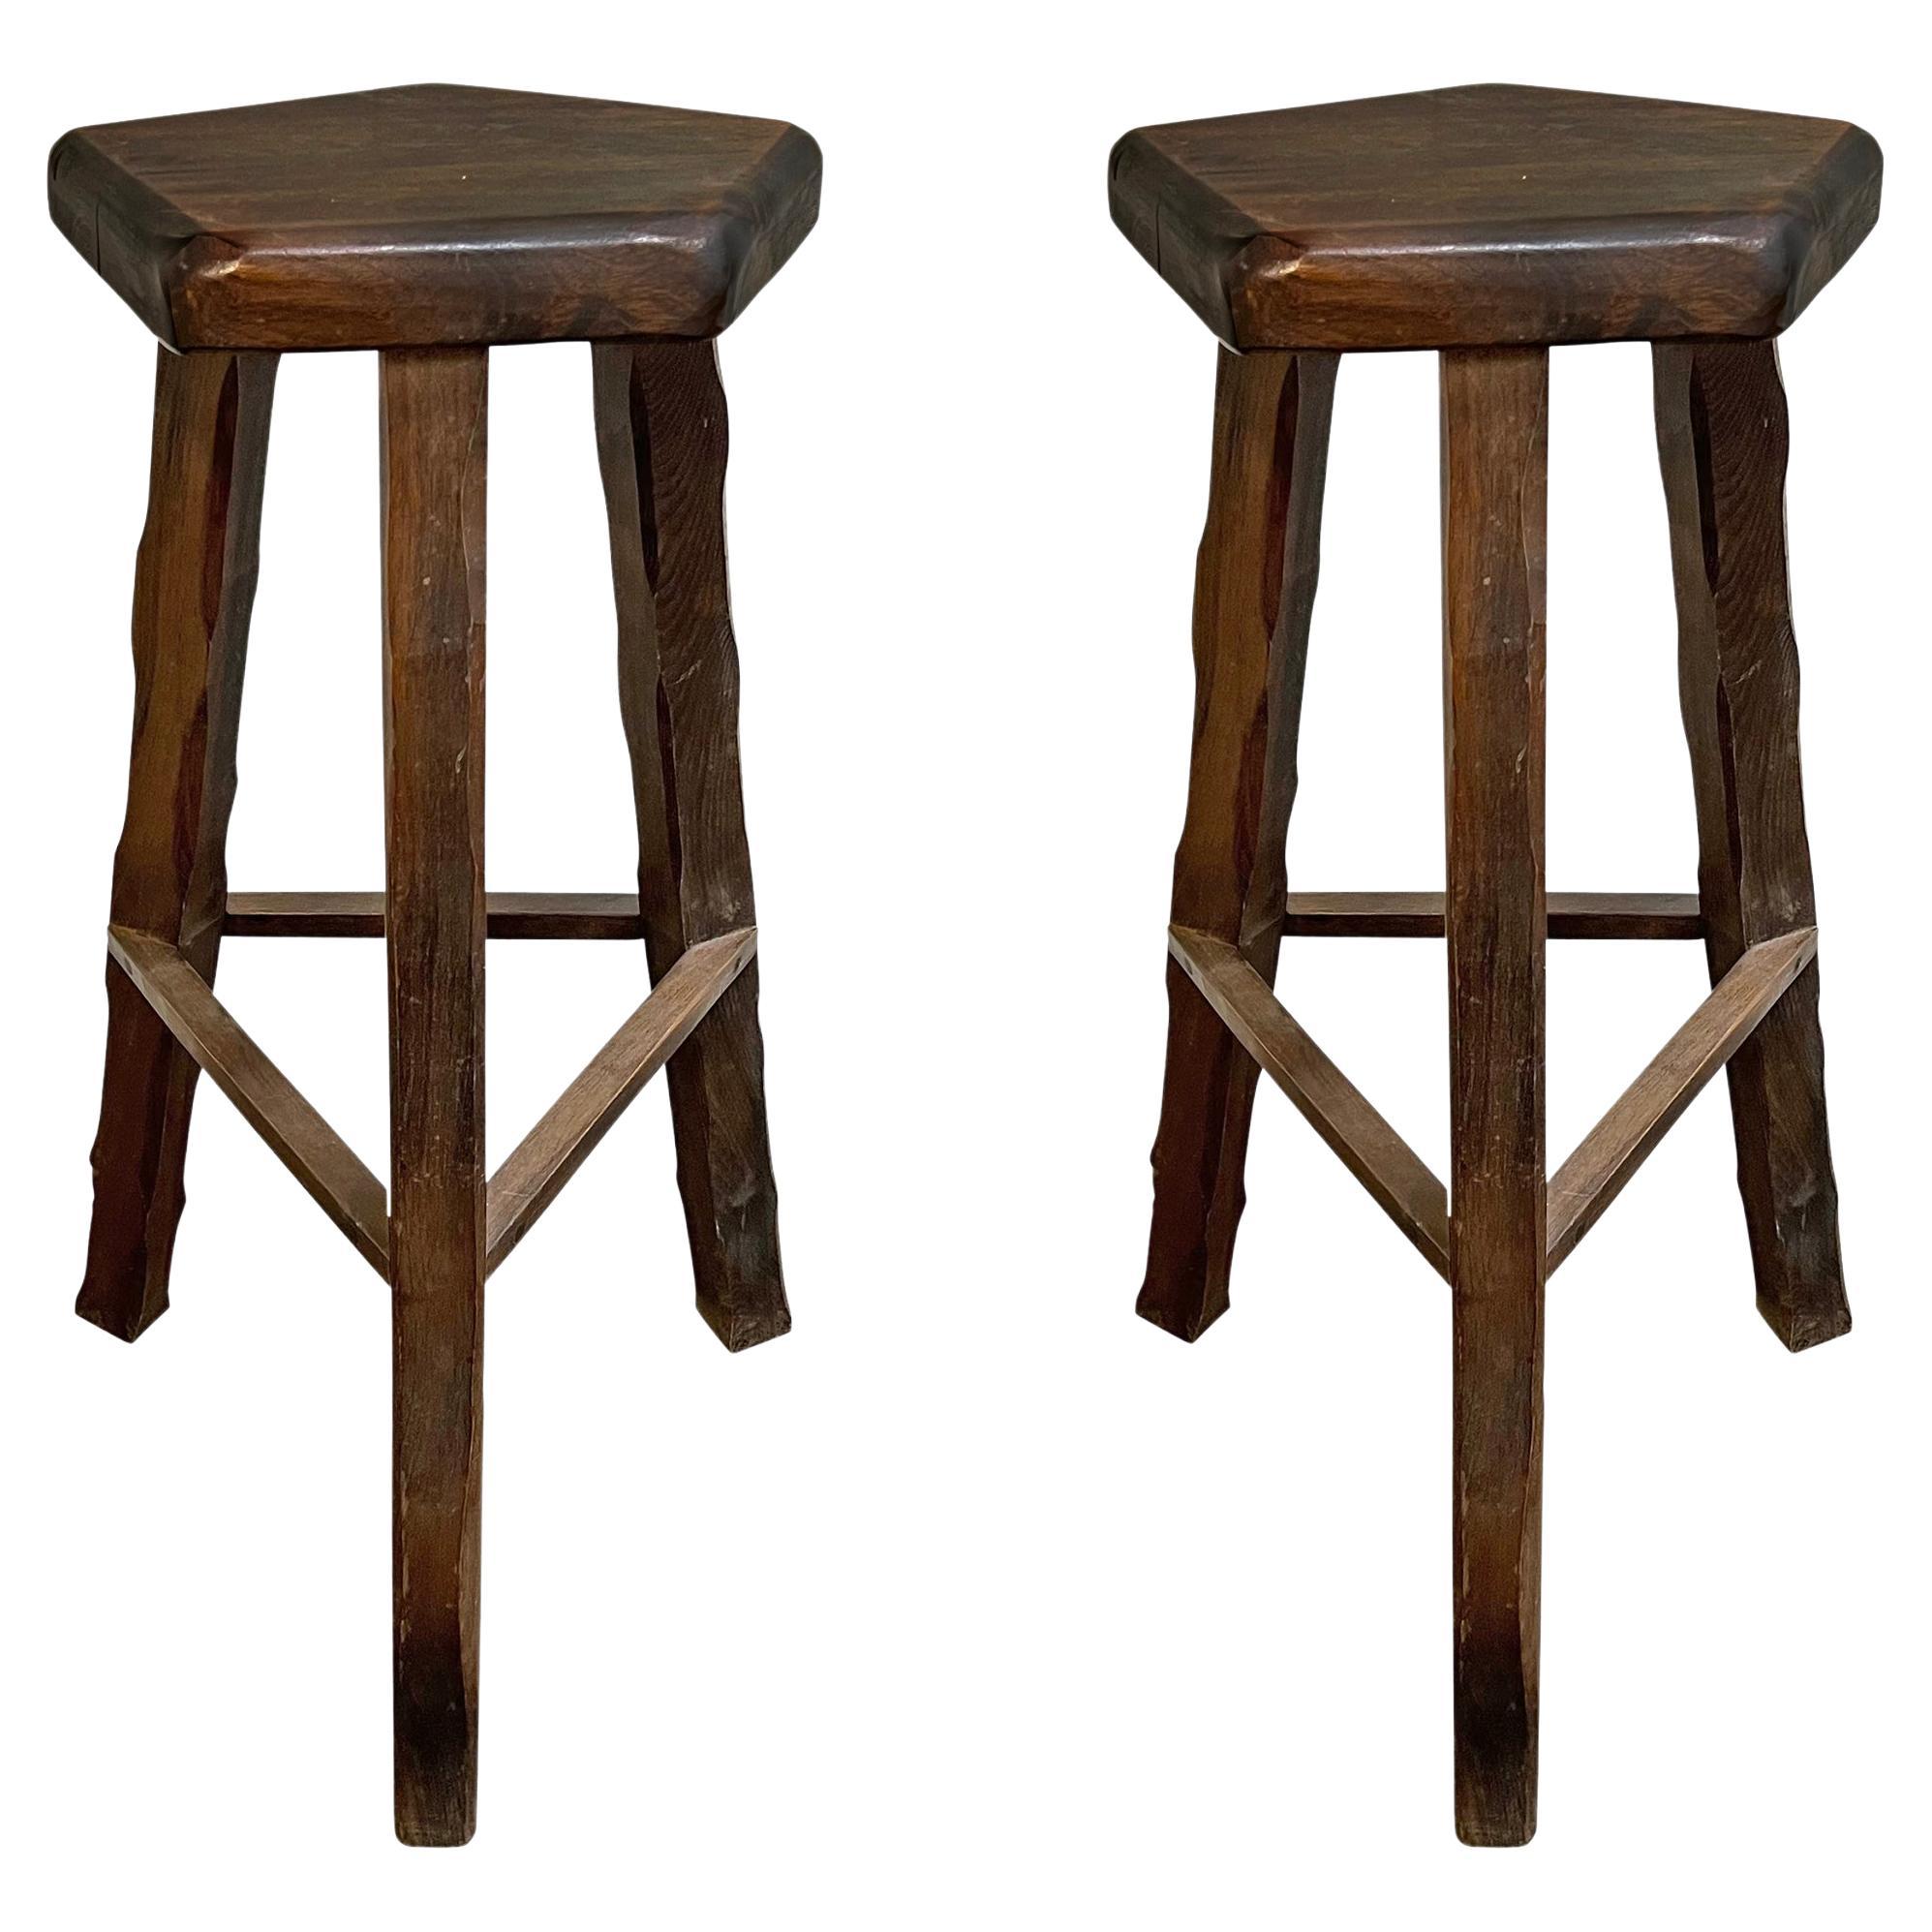 Pair of French Brutalist Barstools